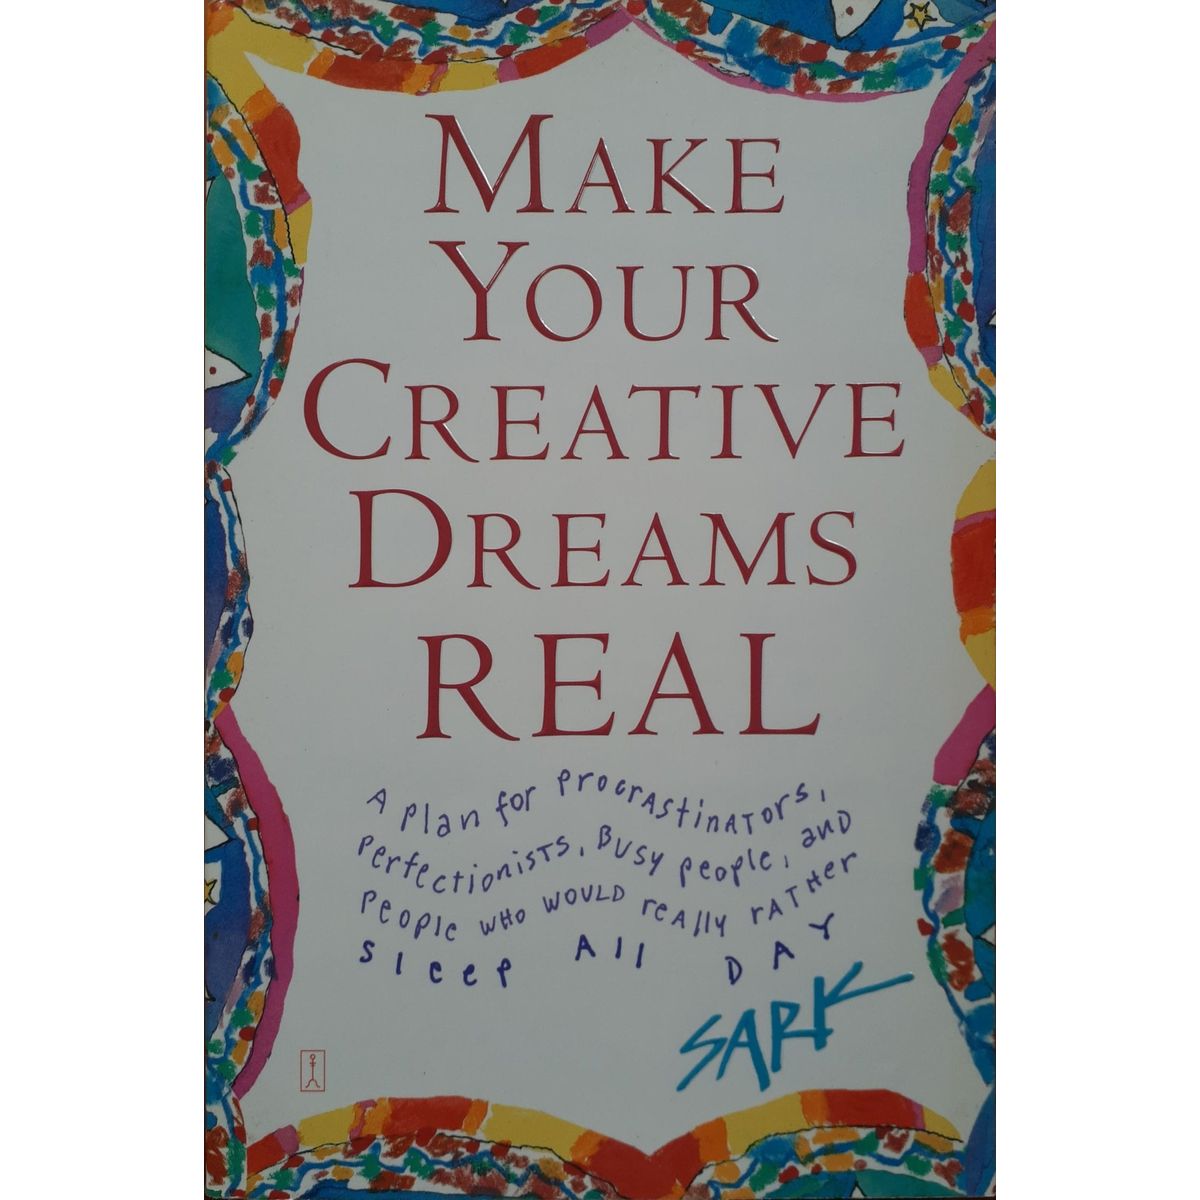 ISBN: 9780743269247 / 0743269241 - Make Your Creative Dreams Real: A Plan for Procrastinators, Perfectionists, Busy People, and People Who Would Really Rather Sleep All Day by Sark [2004]